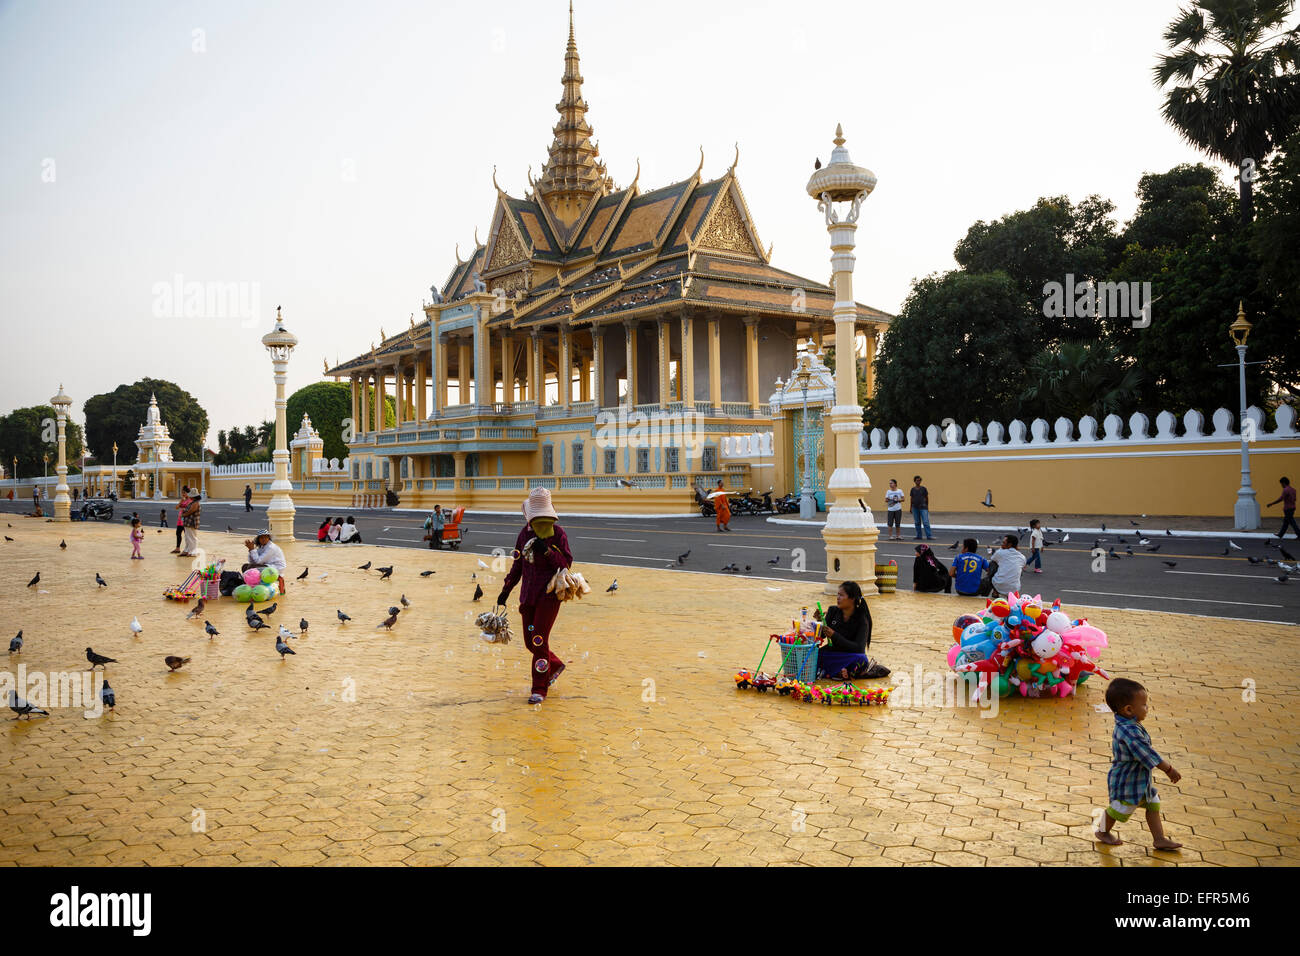 People at a square in front of the Royal Palace, Phnom Penh, Cambodia. Stock Photo